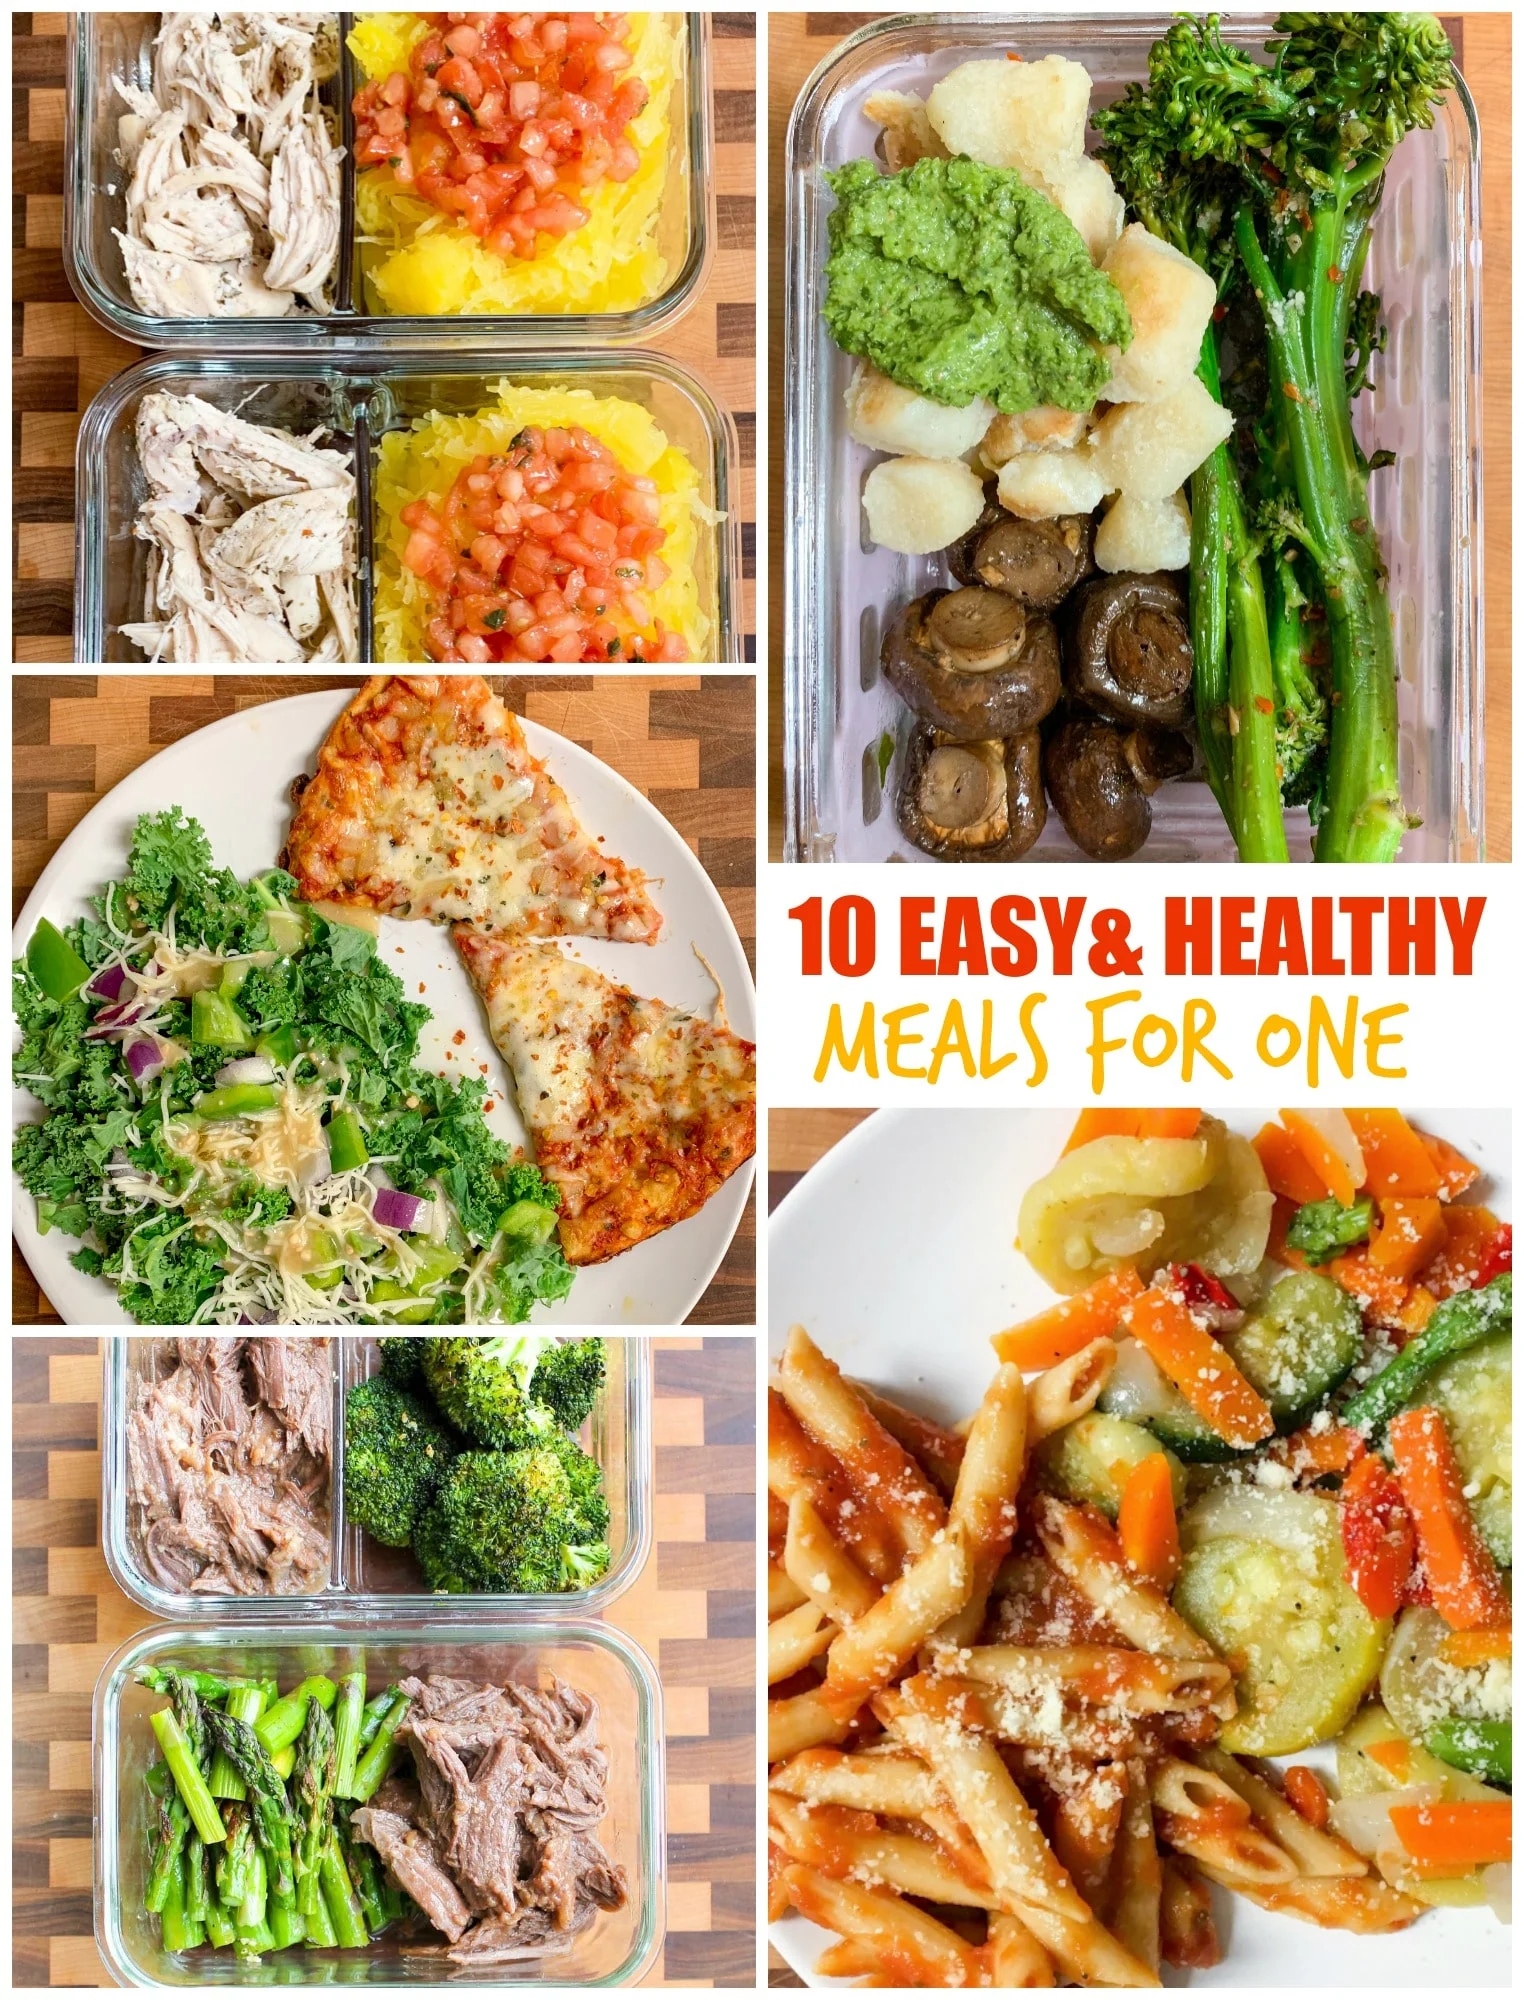 10 Easy and Healthy Meals For One